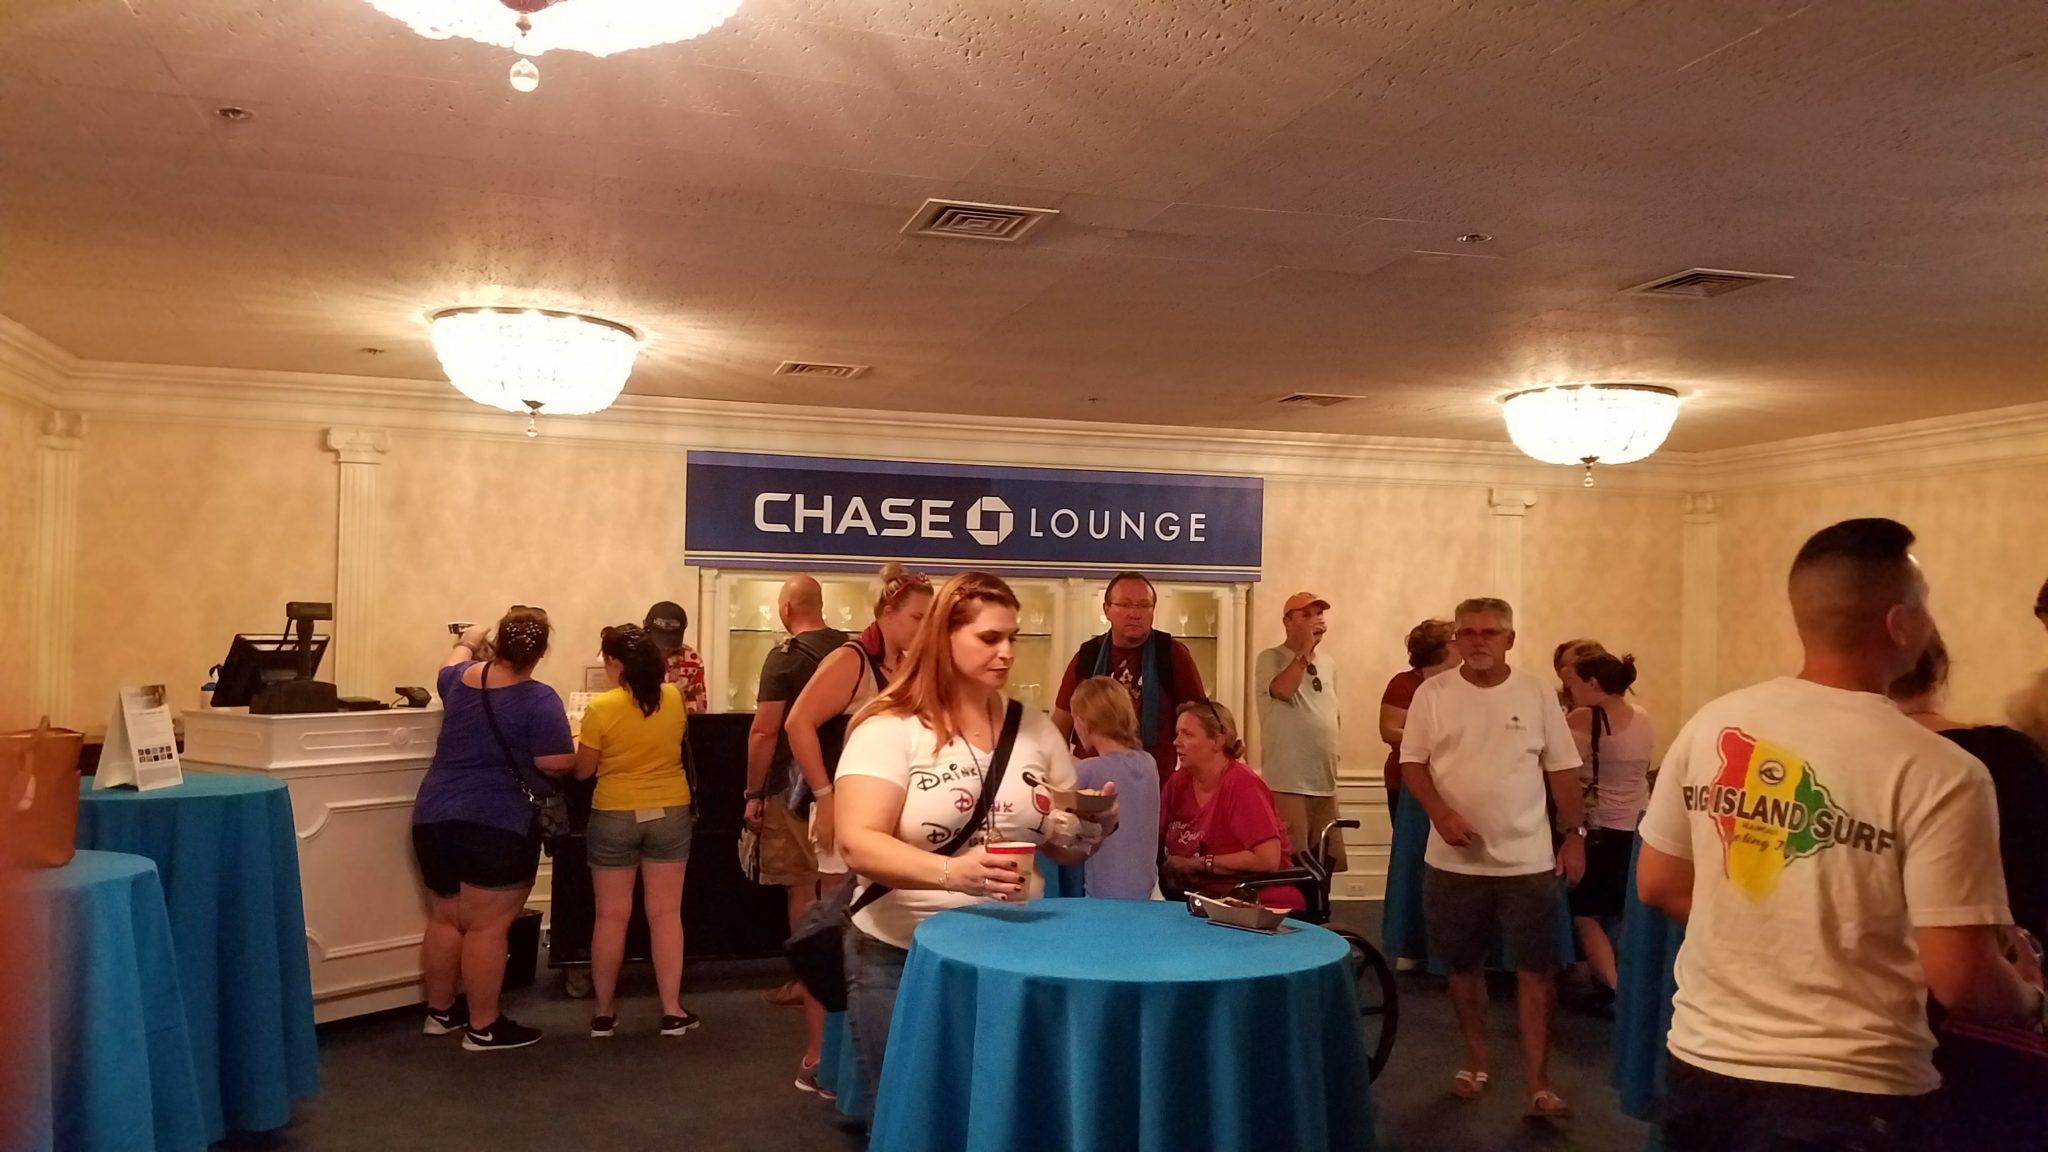 Exclusive Chase Disney Visa Lounge Cut From this Year’s Food & Wine Festival